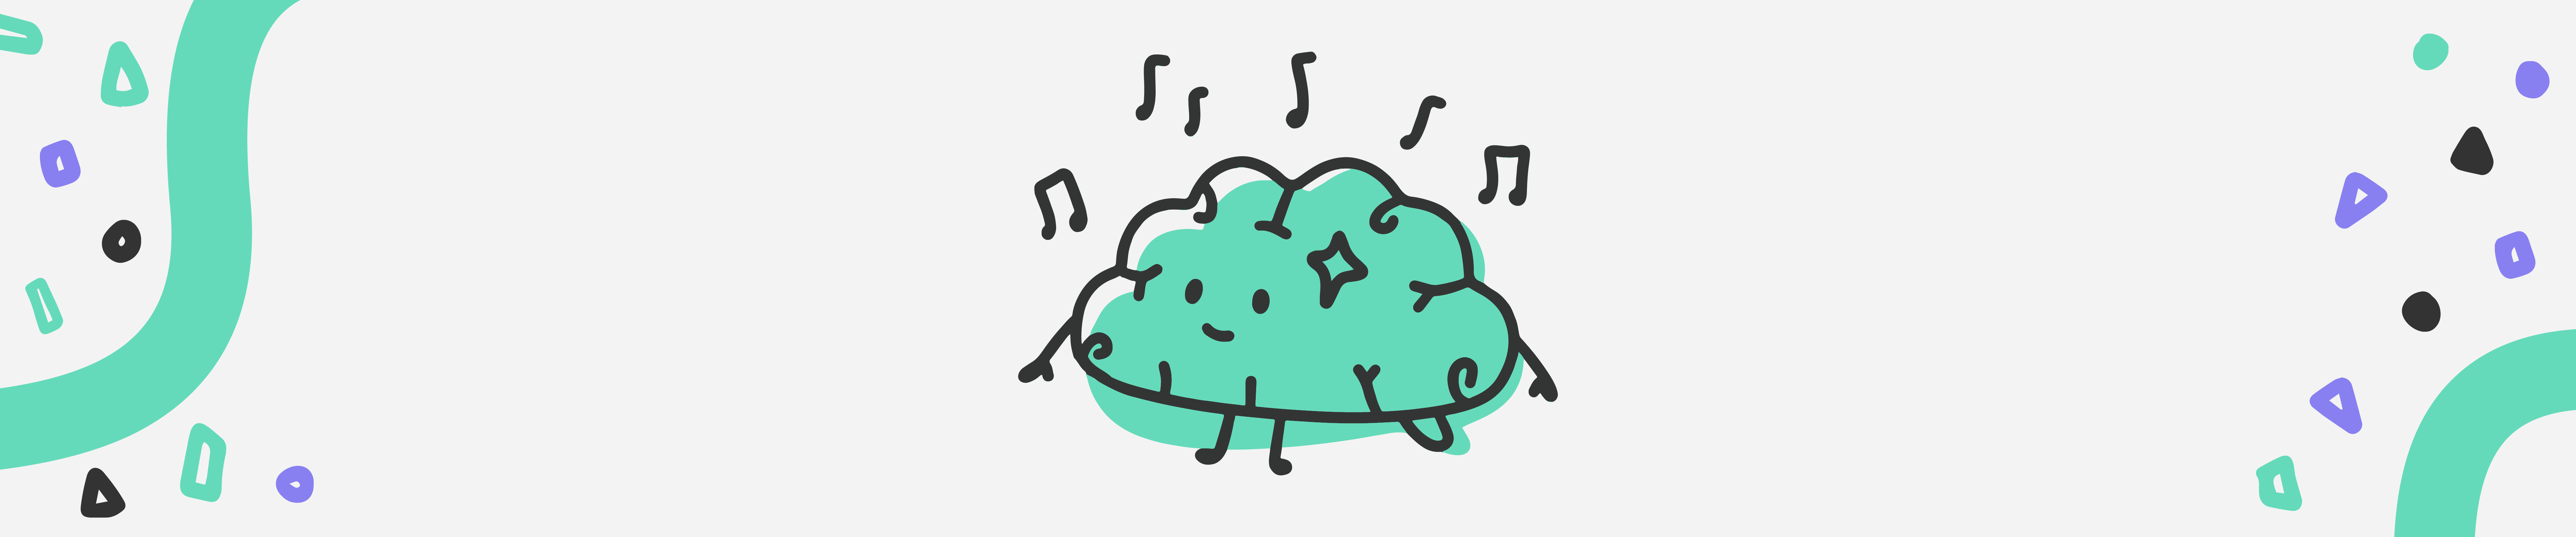 Brain cartoon character with musical notes coming out of it